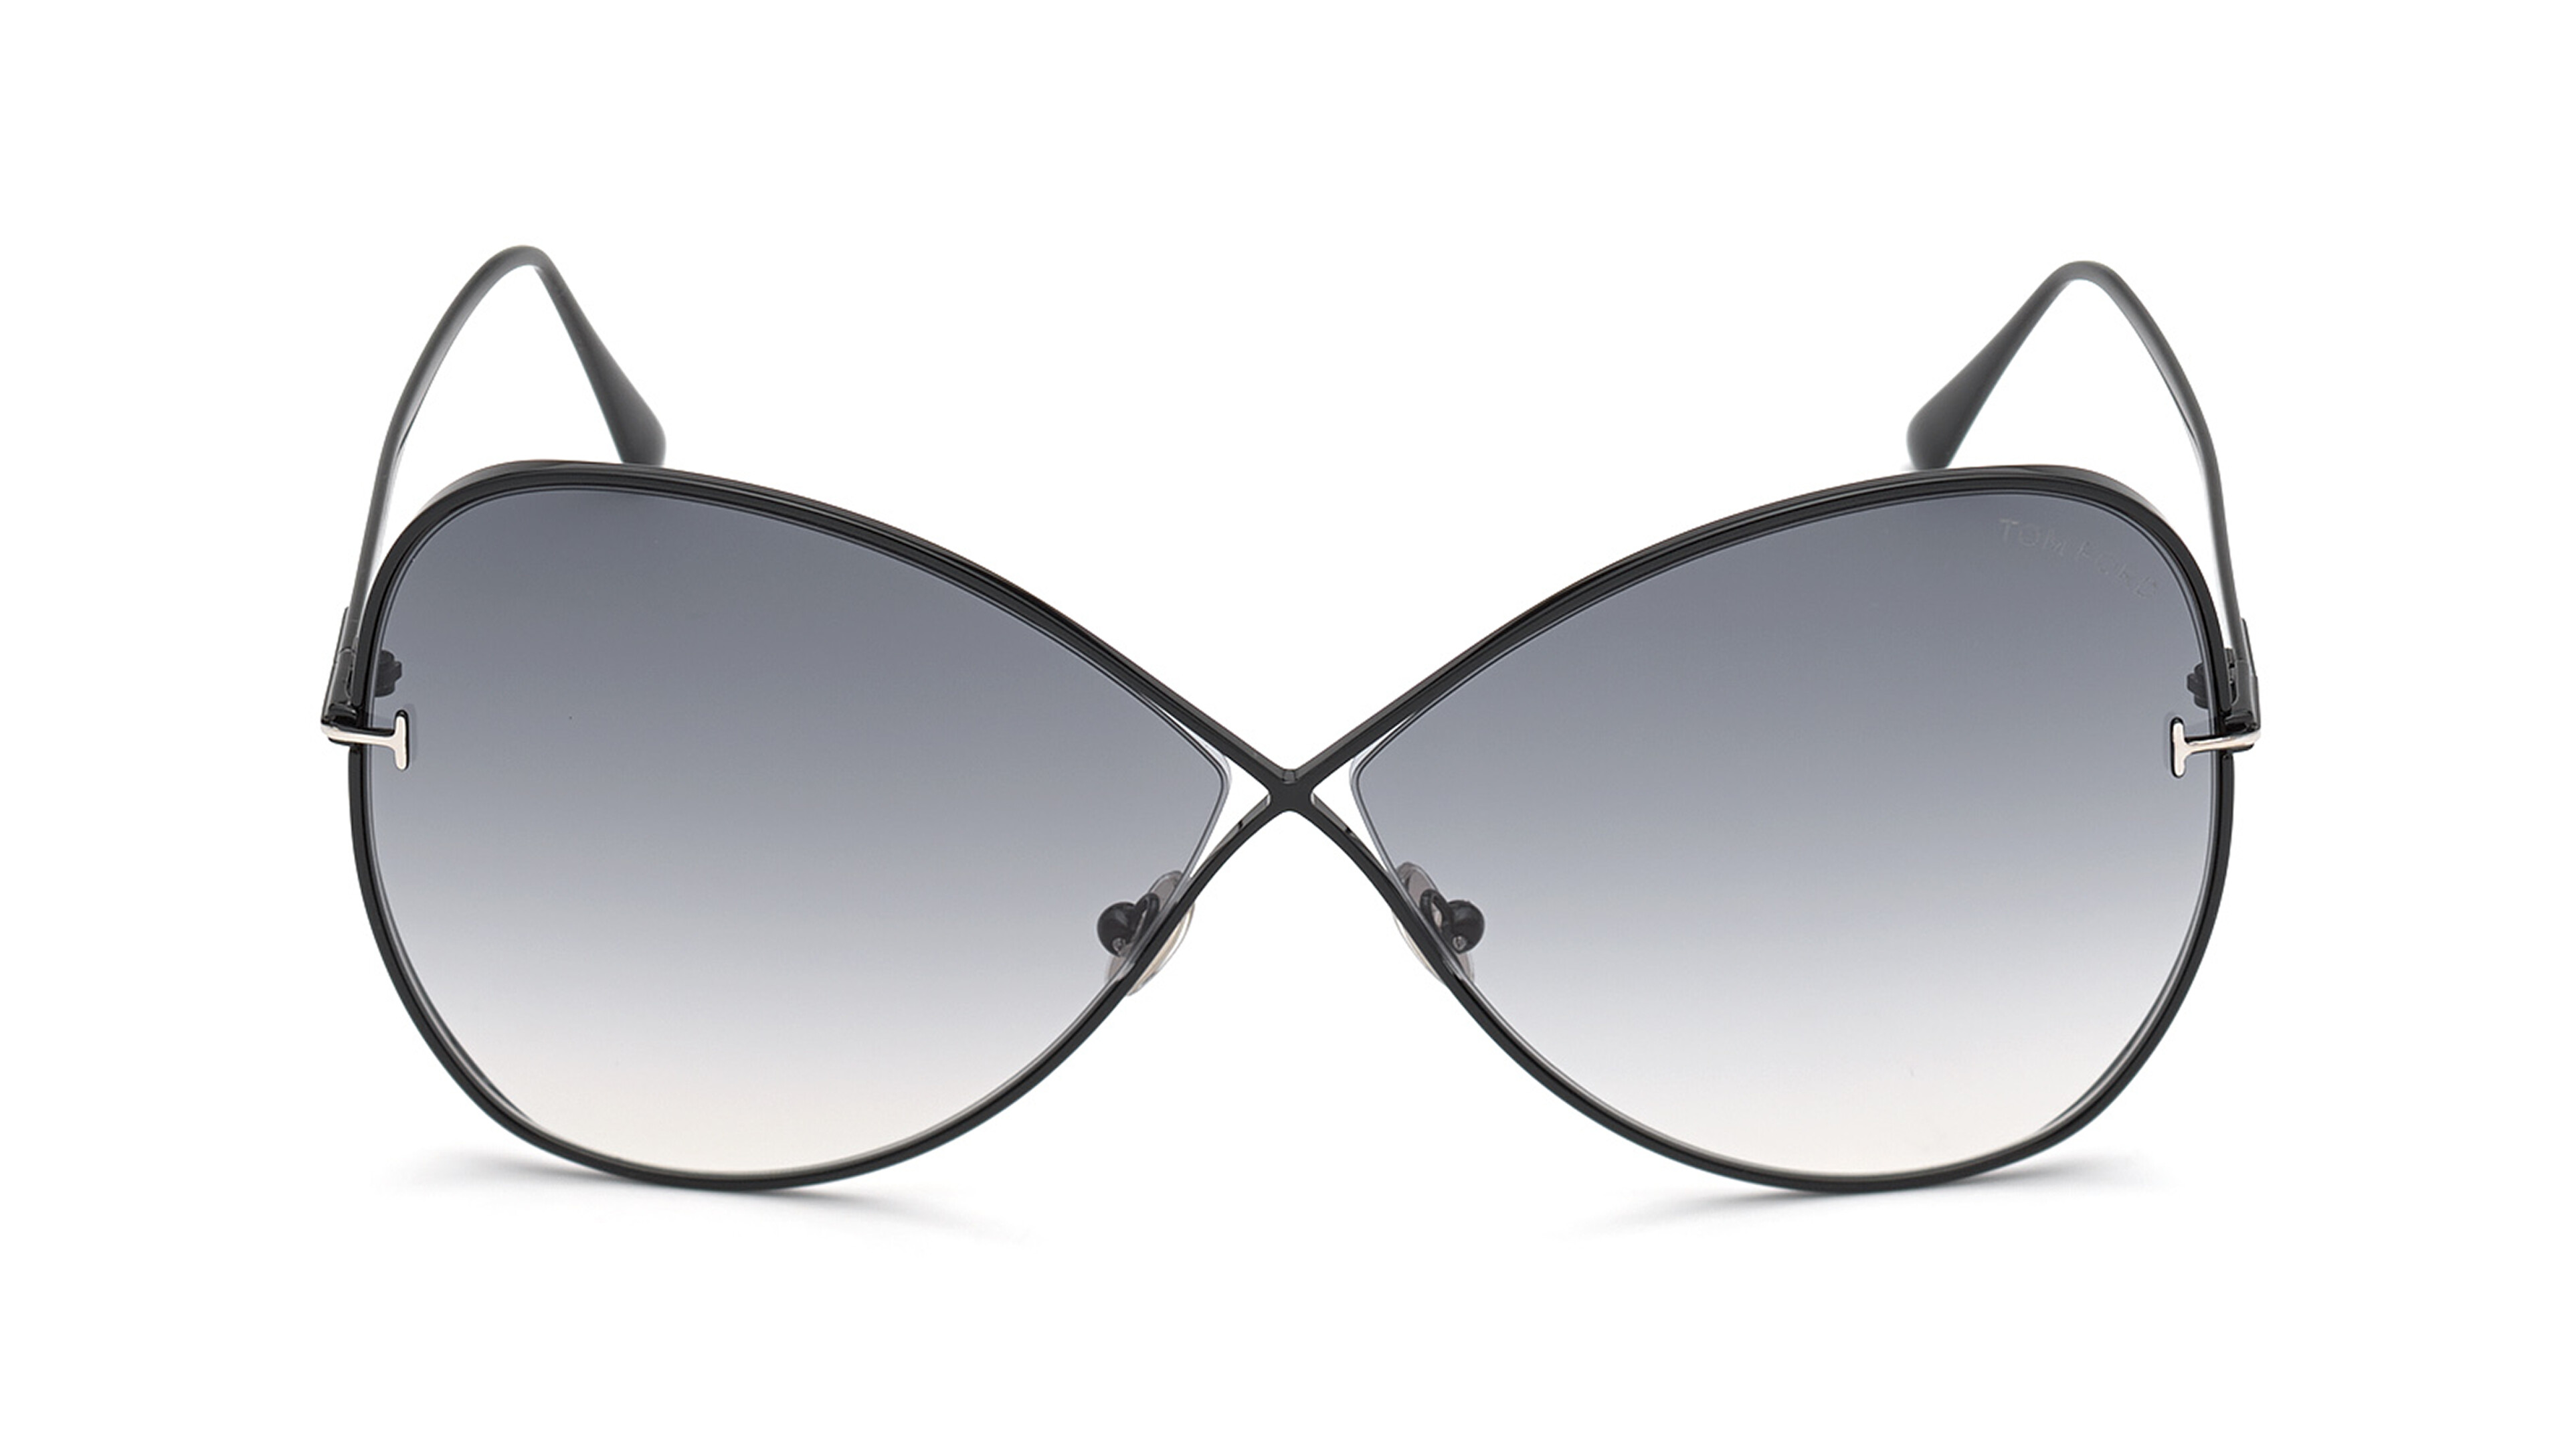 [products.image.front] Tom Ford FT0842 01B Sonnenbrille